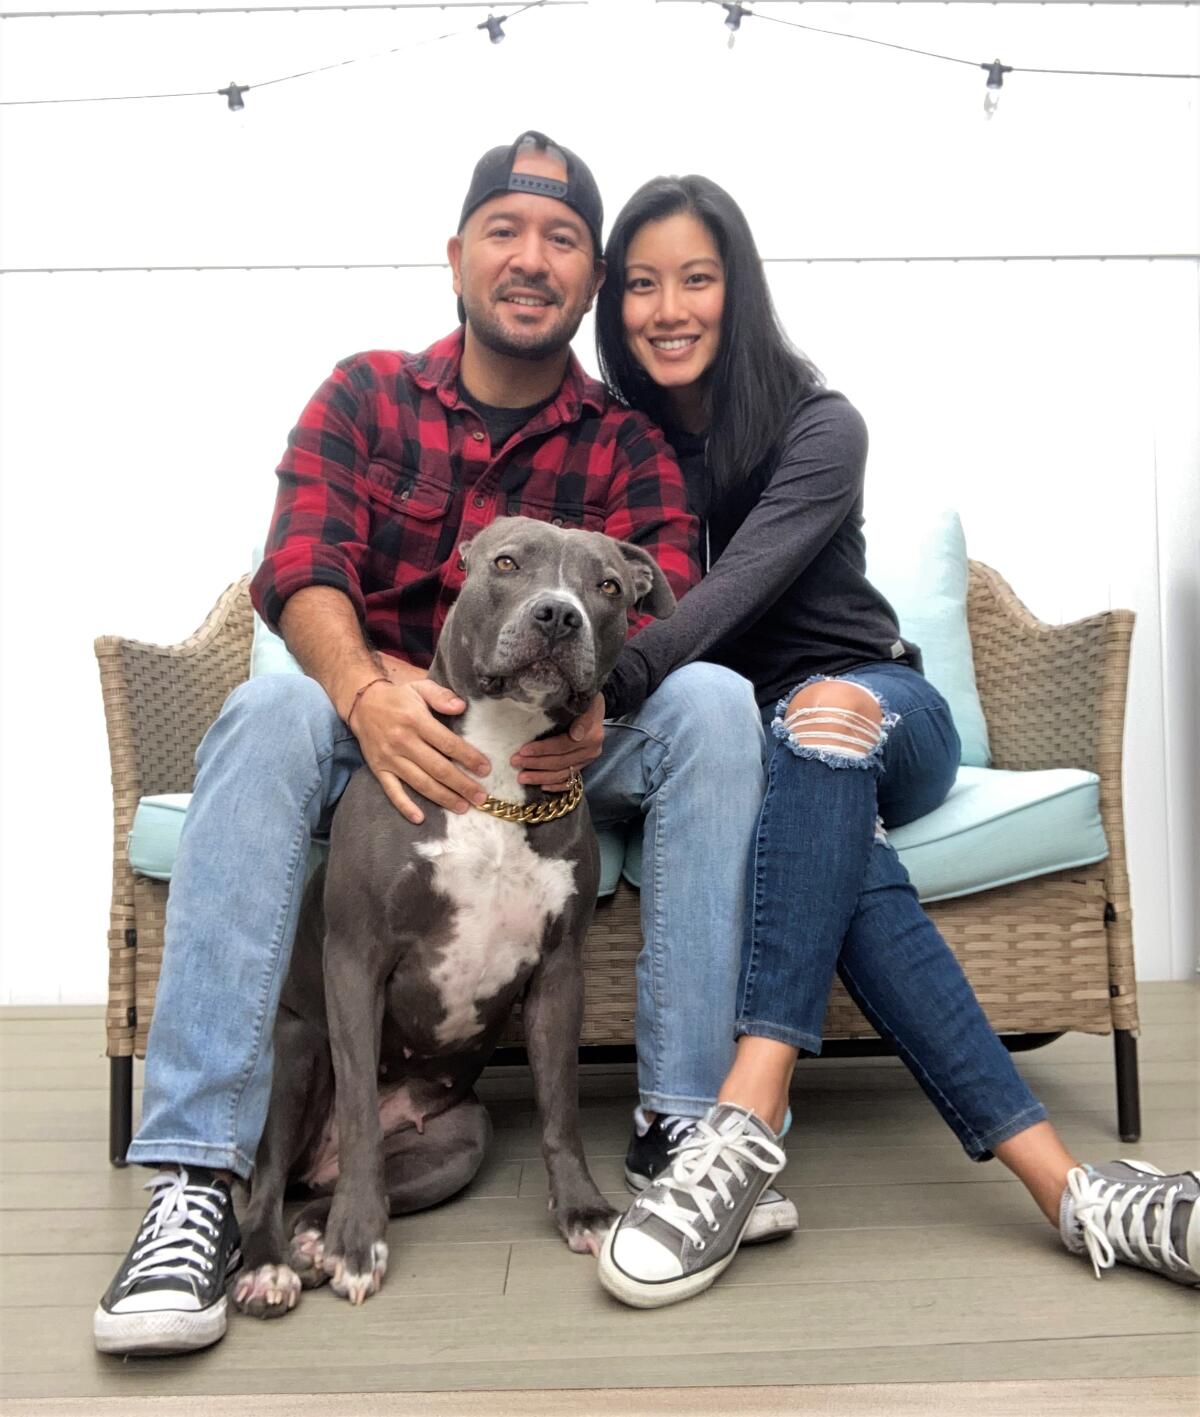 Fountain Valley veteran Giovanni Berdejo, pictured with wife Monica and dog Puna.